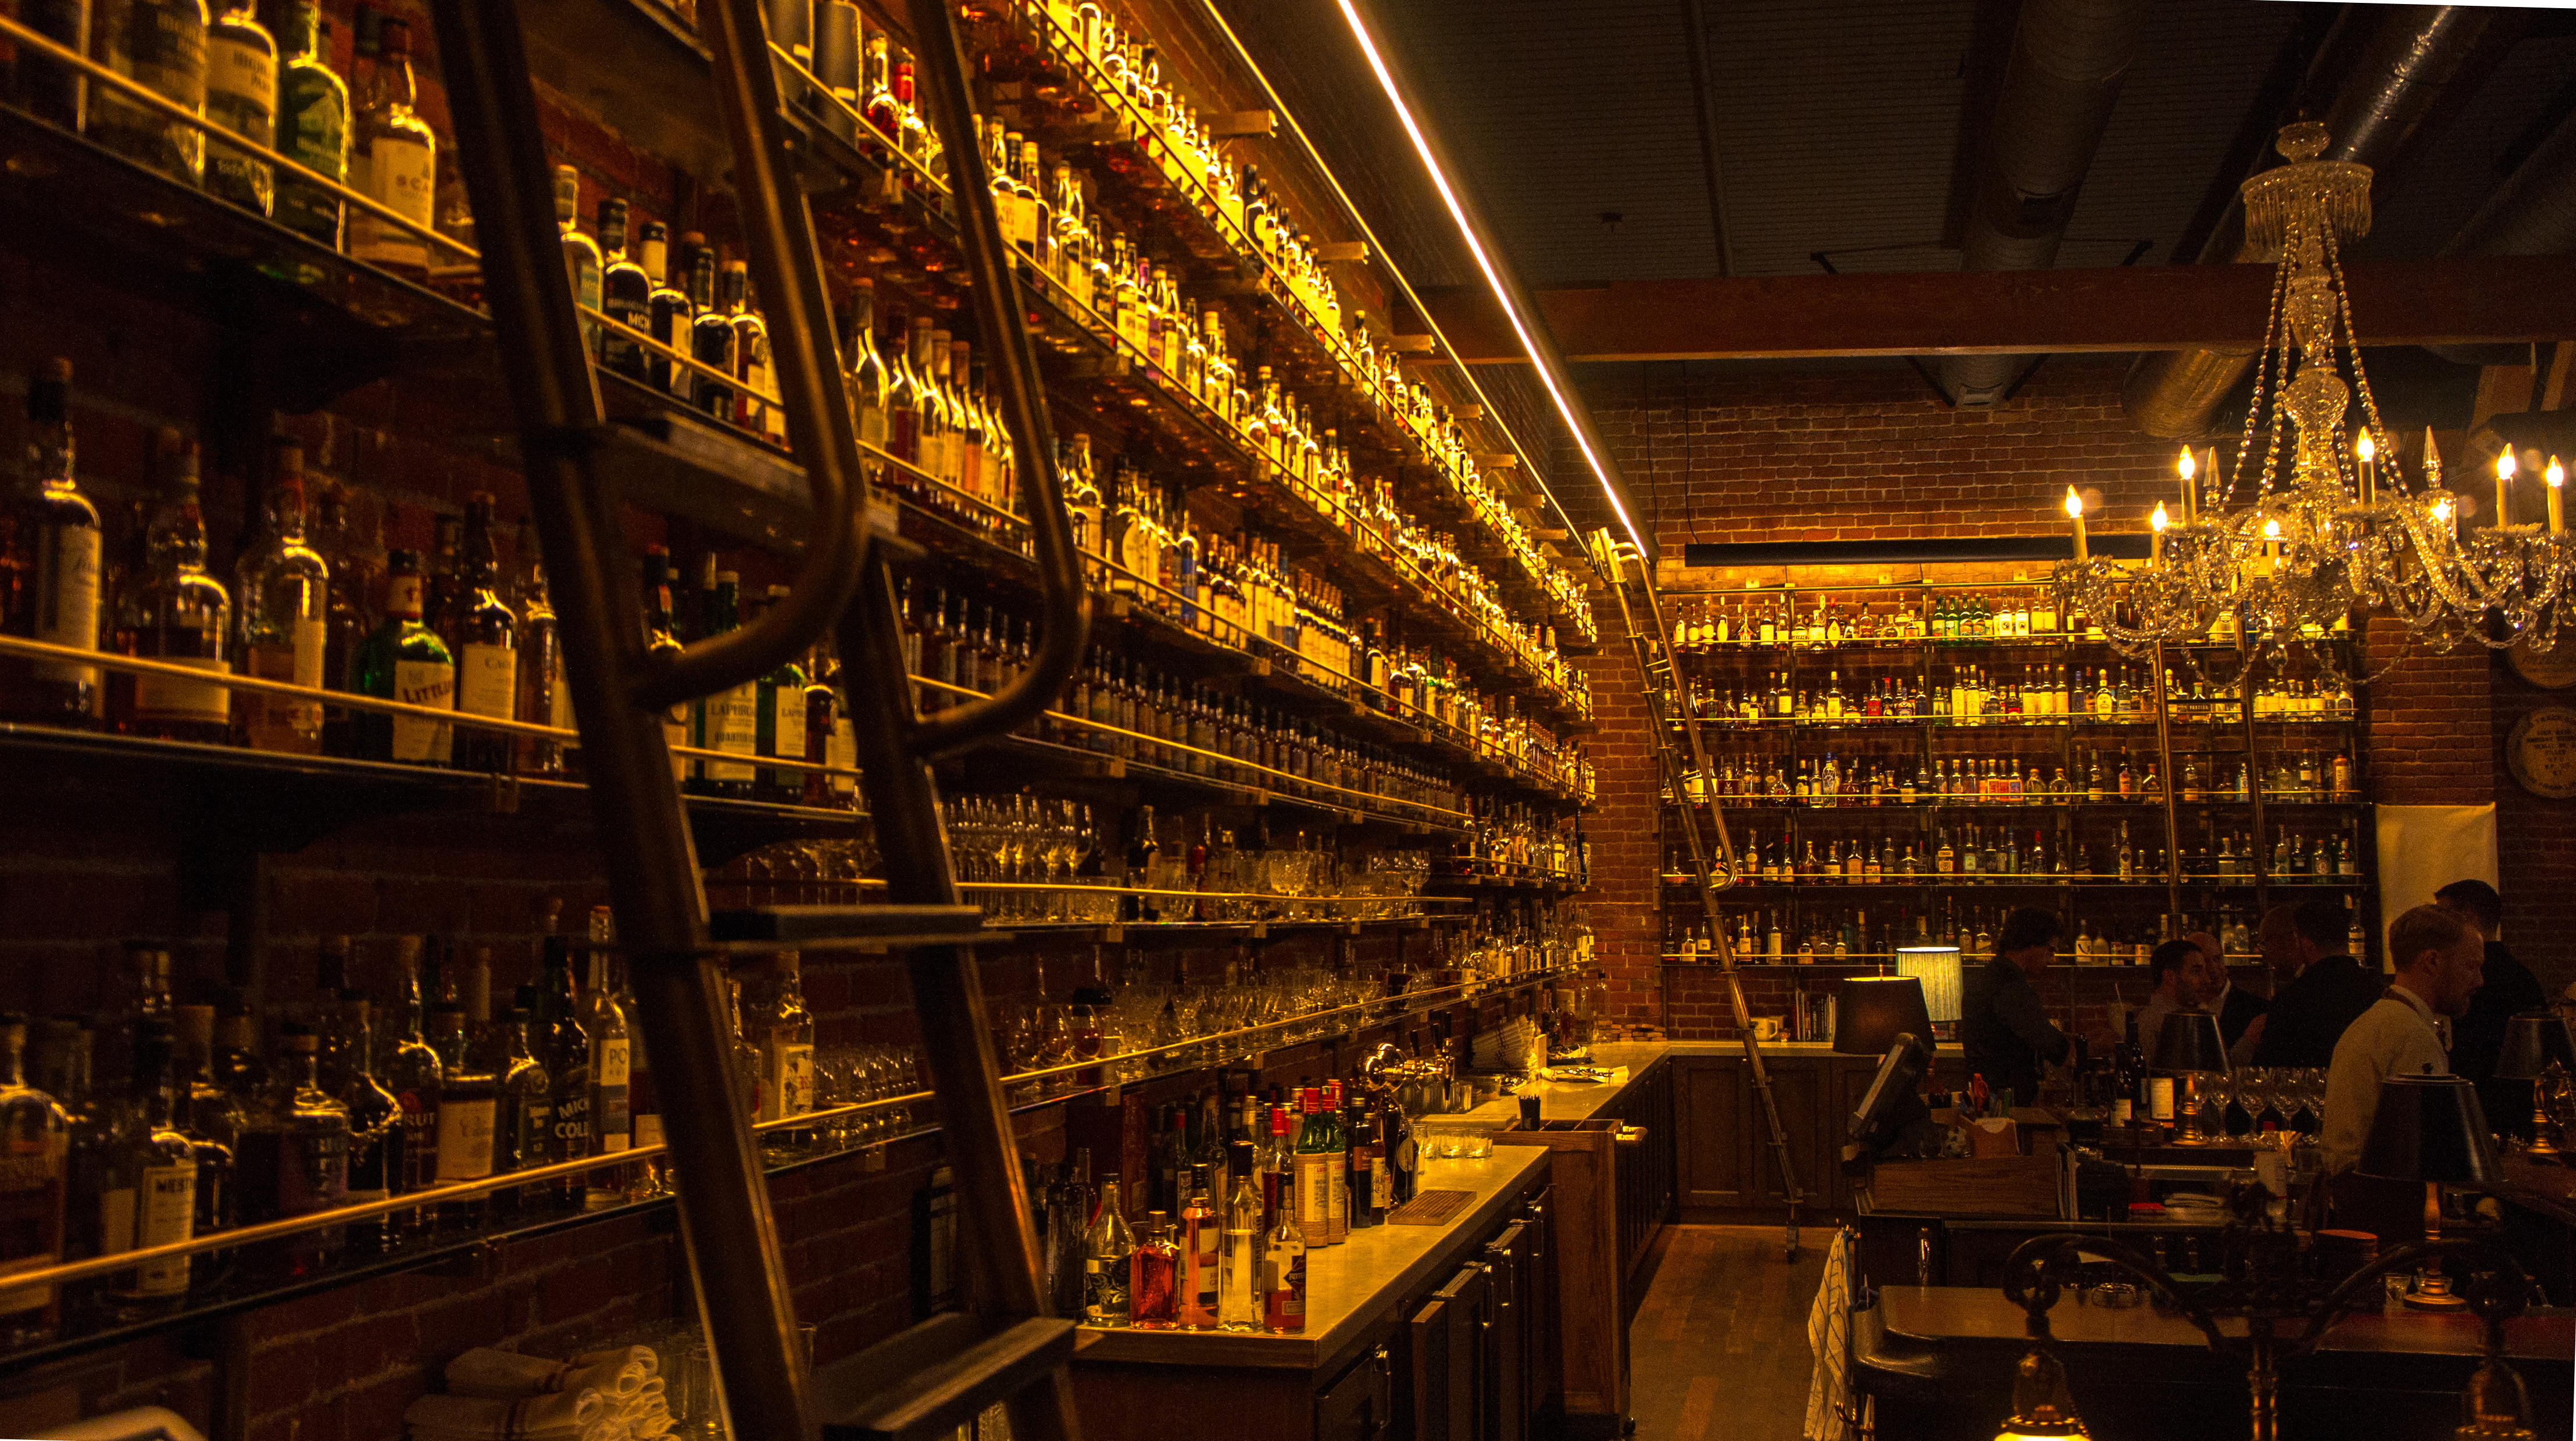 This Classy Whiskey Library in Oregon Has Whiskey From All Over The World